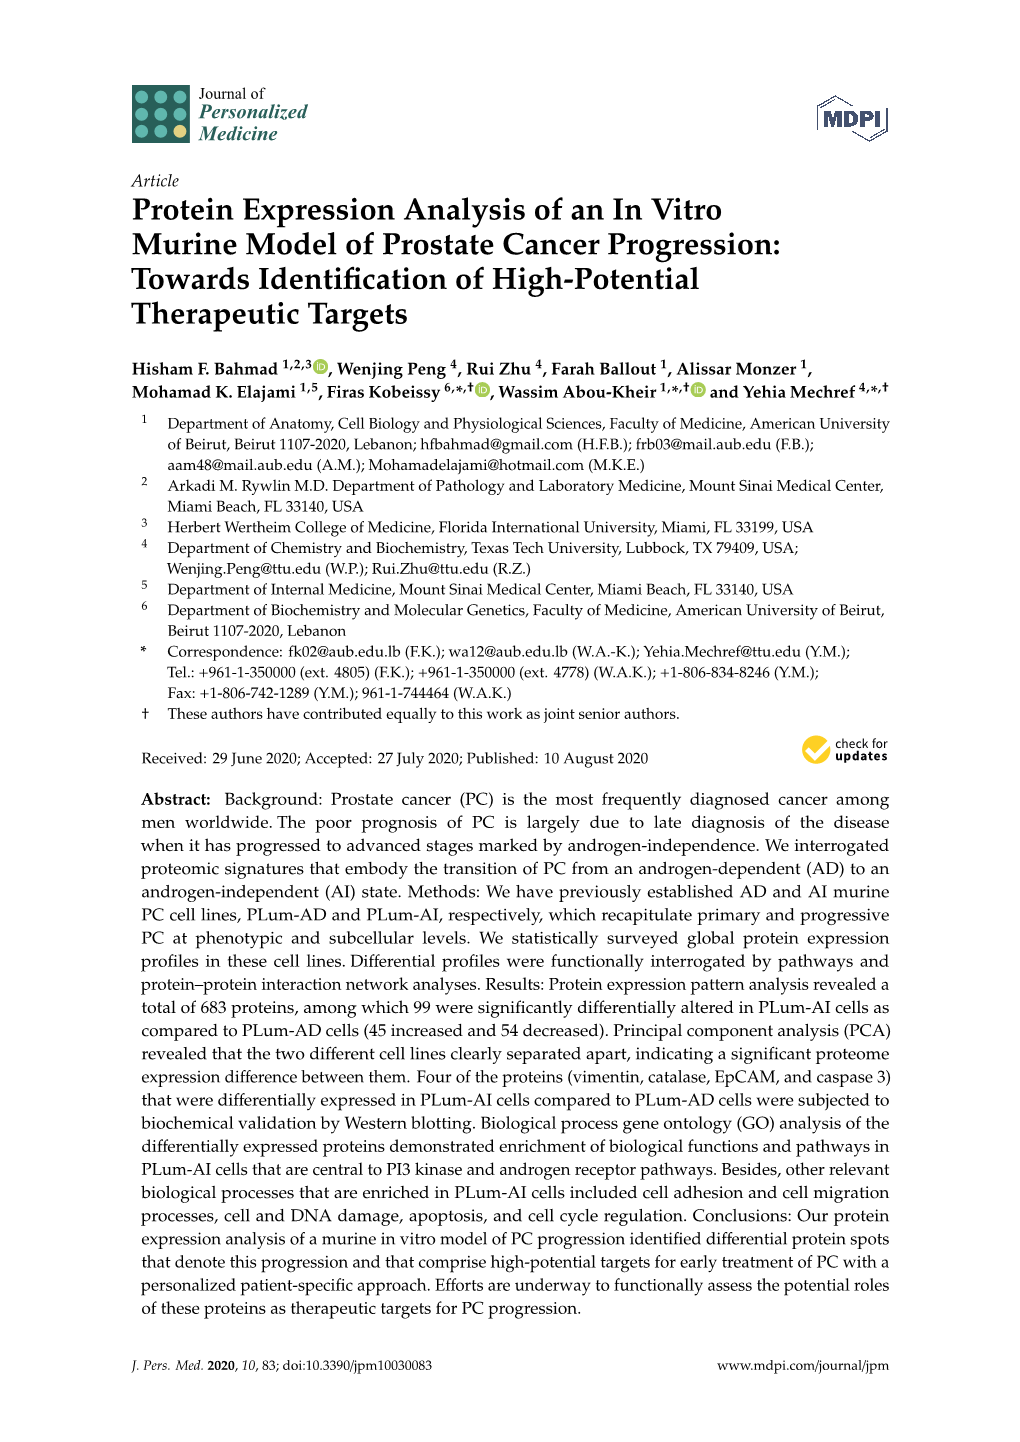 Protein Expression Analysis of an in Vitro Murine Model of Prostate Cancer Progression: Towards Identiﬁcation of High-Potential Therapeutic Targets